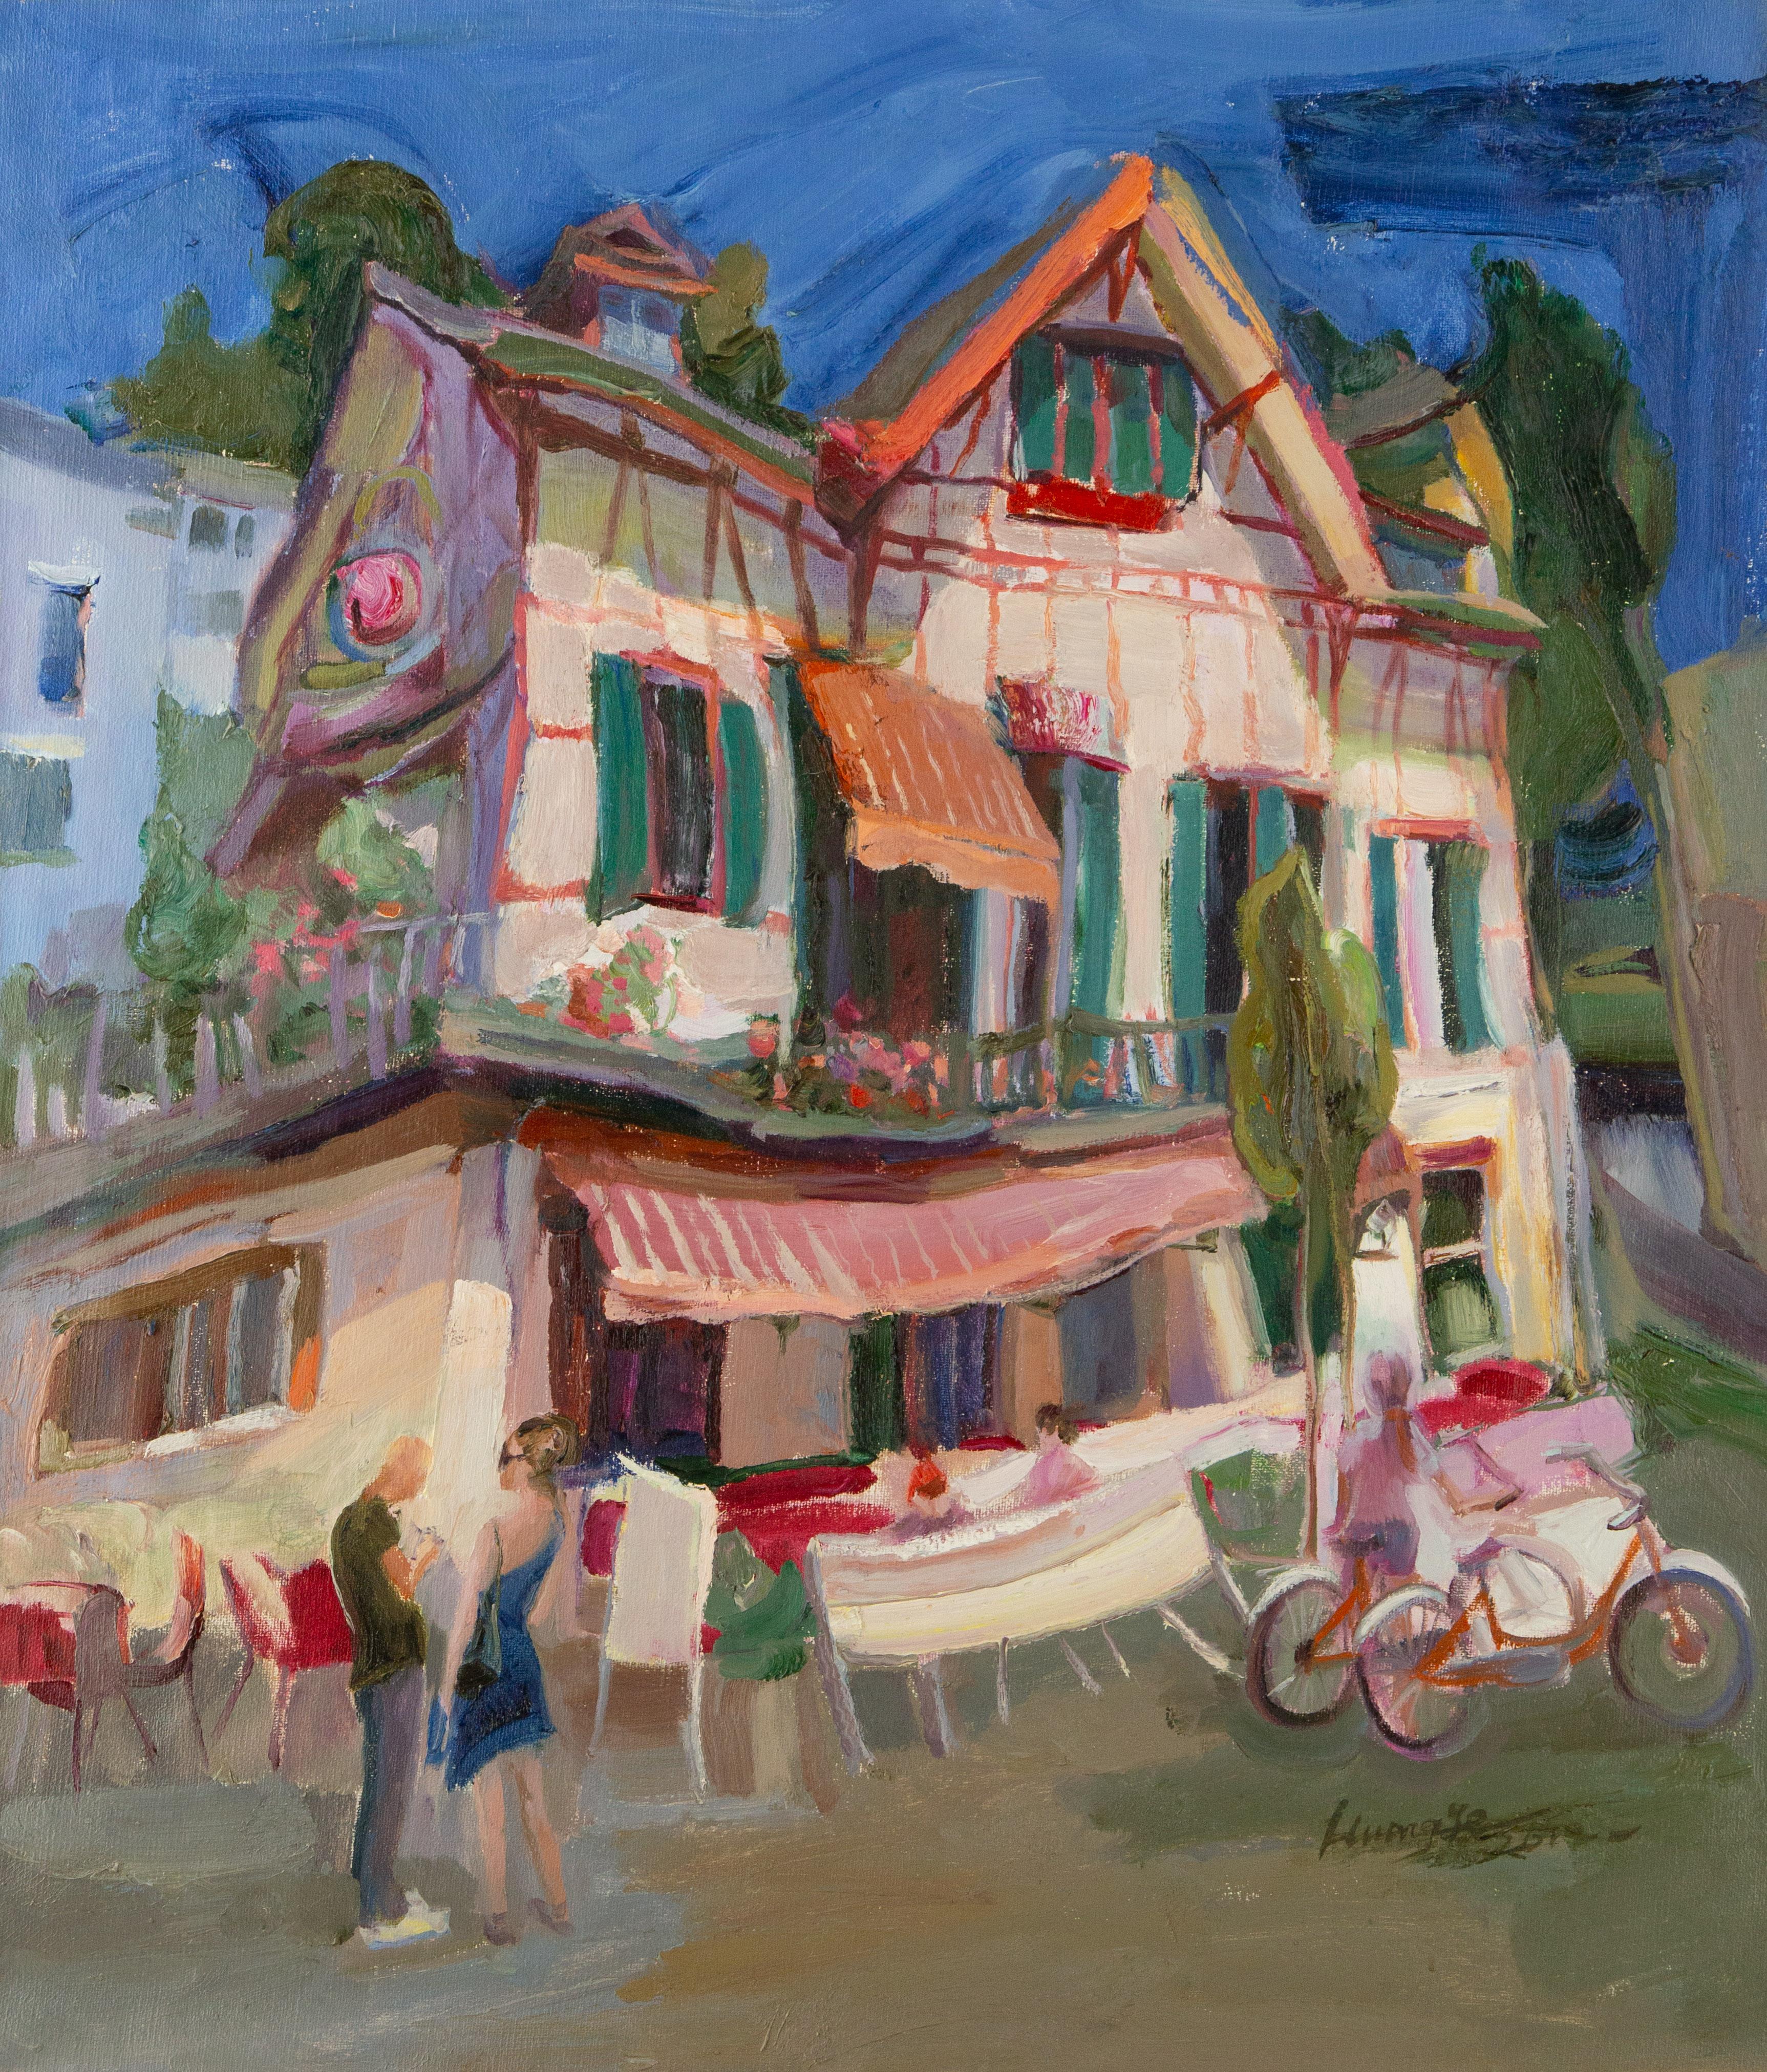  Title: Sunday Cafe
 Medium: Oil on canvas
 Size: 26.5 x 23 inches
 Frame: Framing options available!
 Condition: The painting appears to be in excellent condition.
 Note: This painting is unstretched
 Year: 2000 Circa
 Artist: Ye Huang
 Signature: